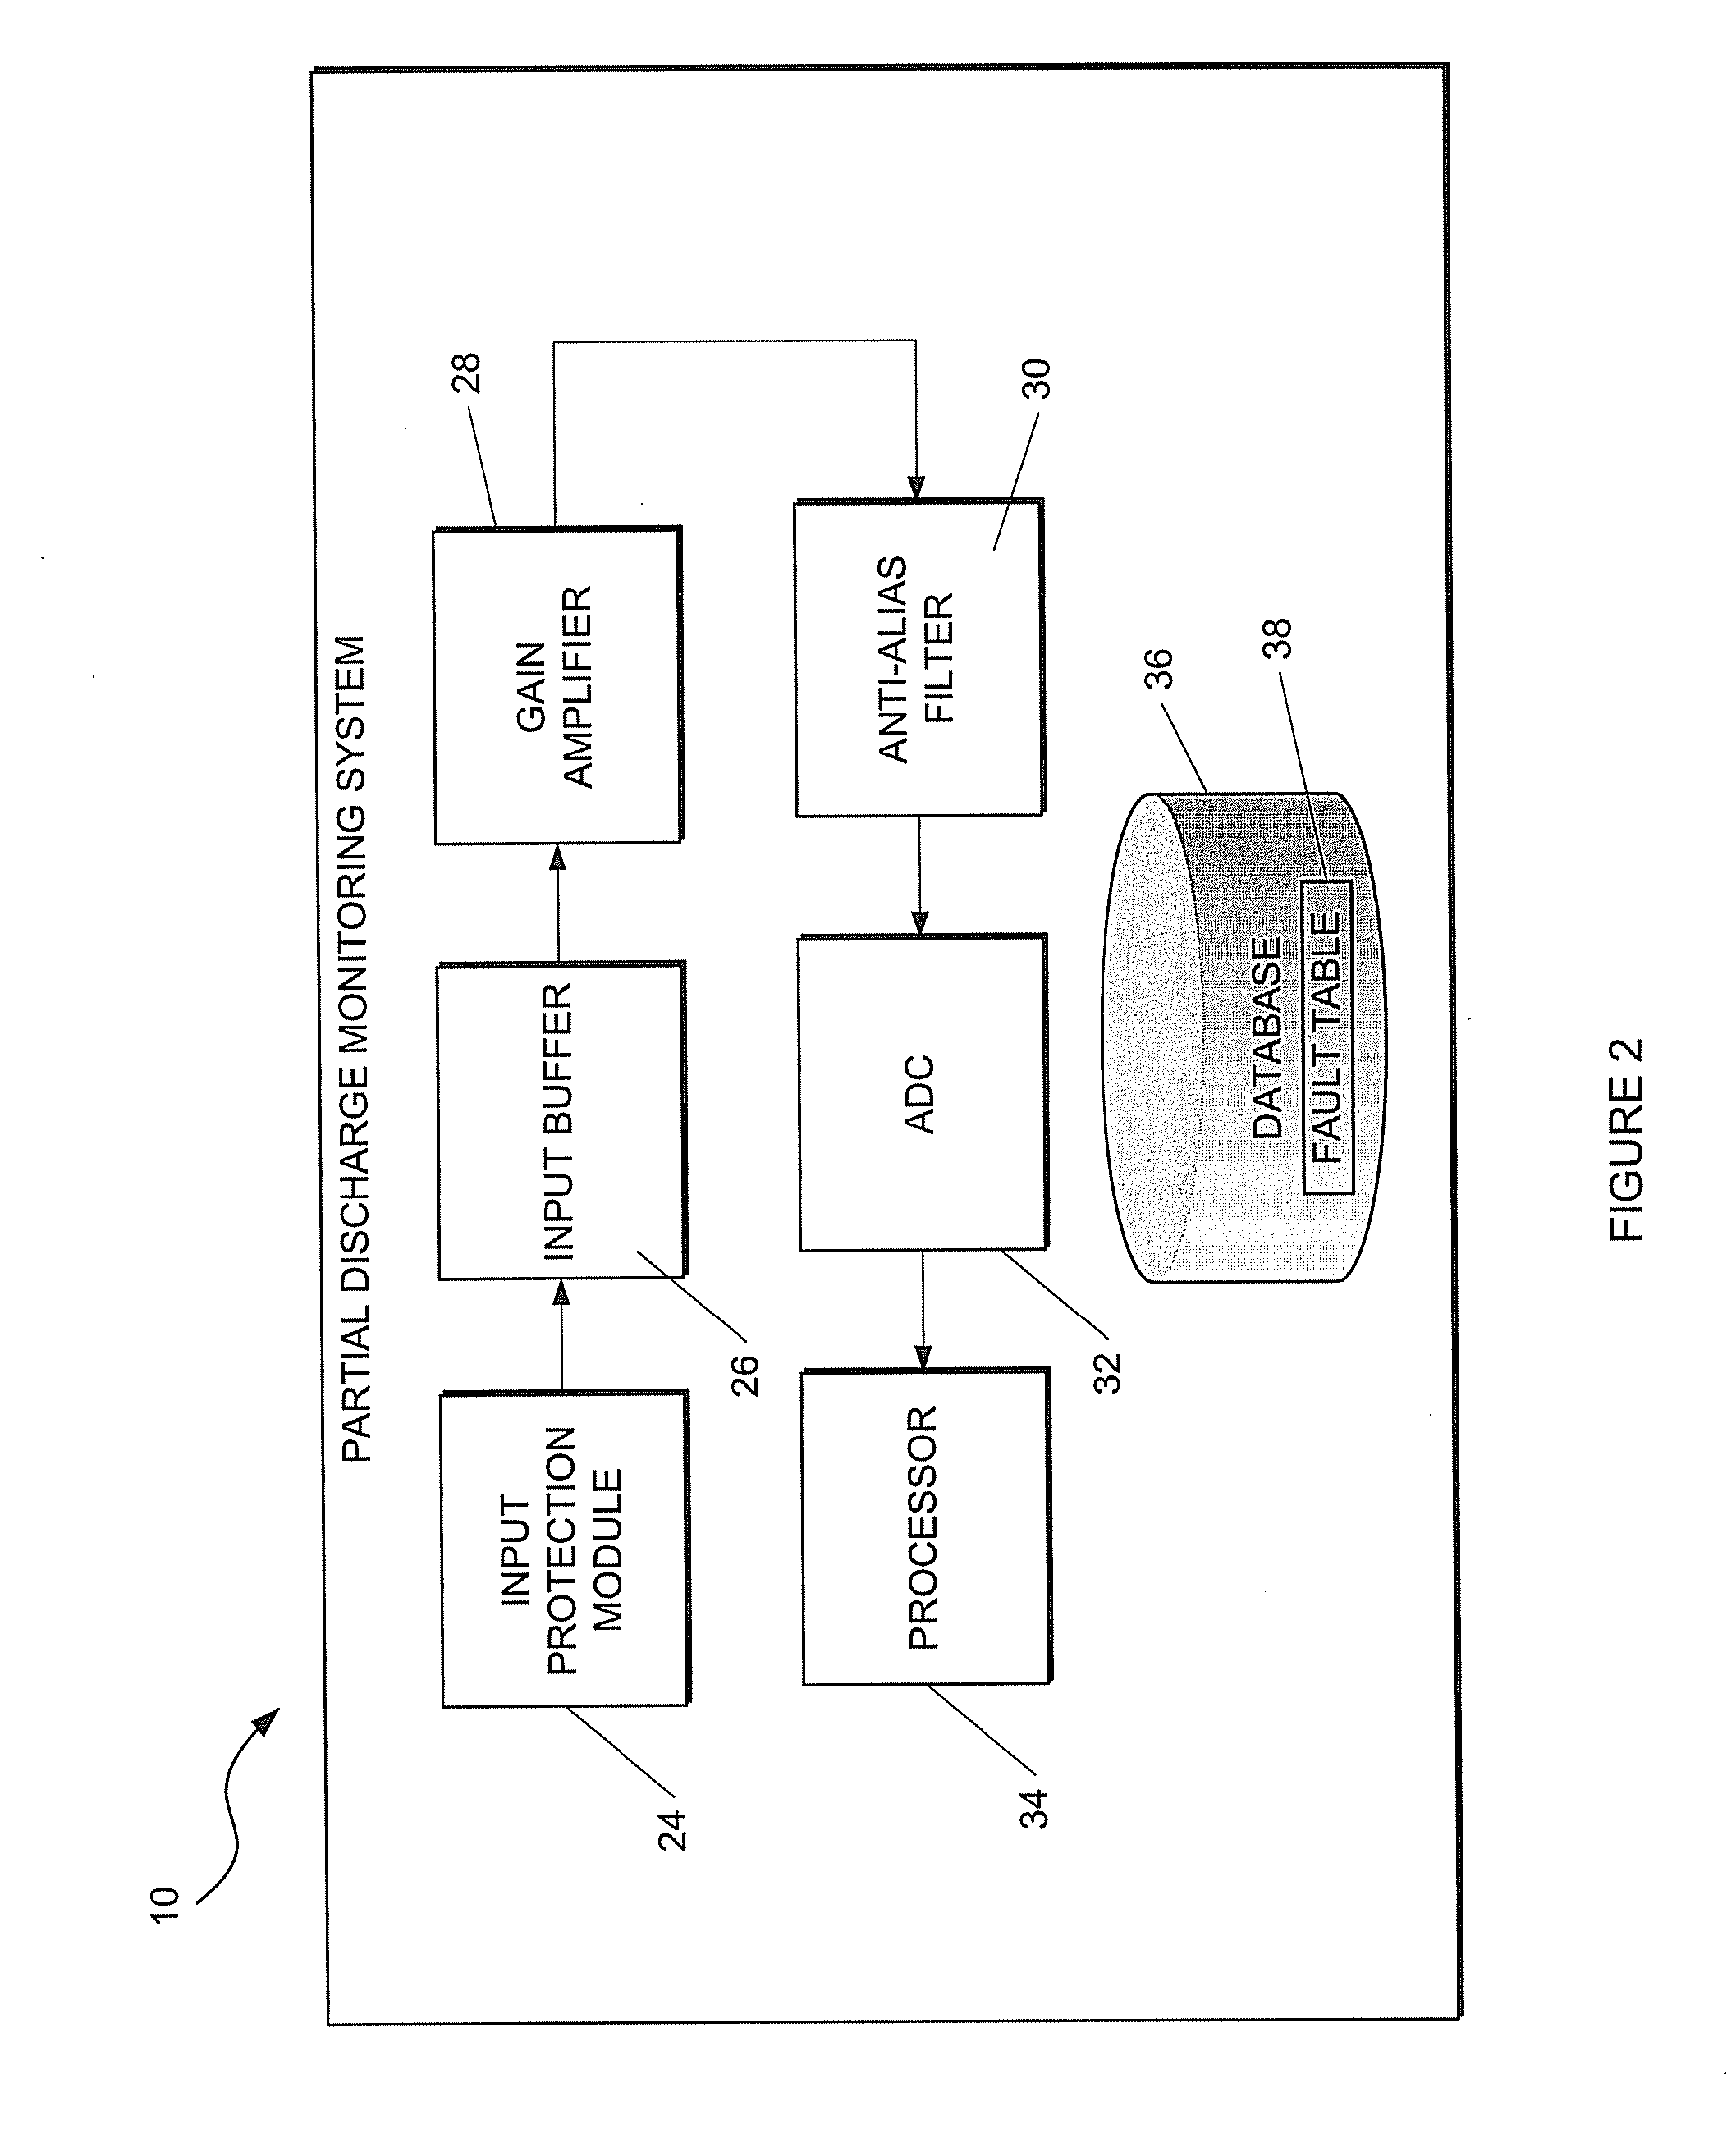 Partial discharge monitoring method and system